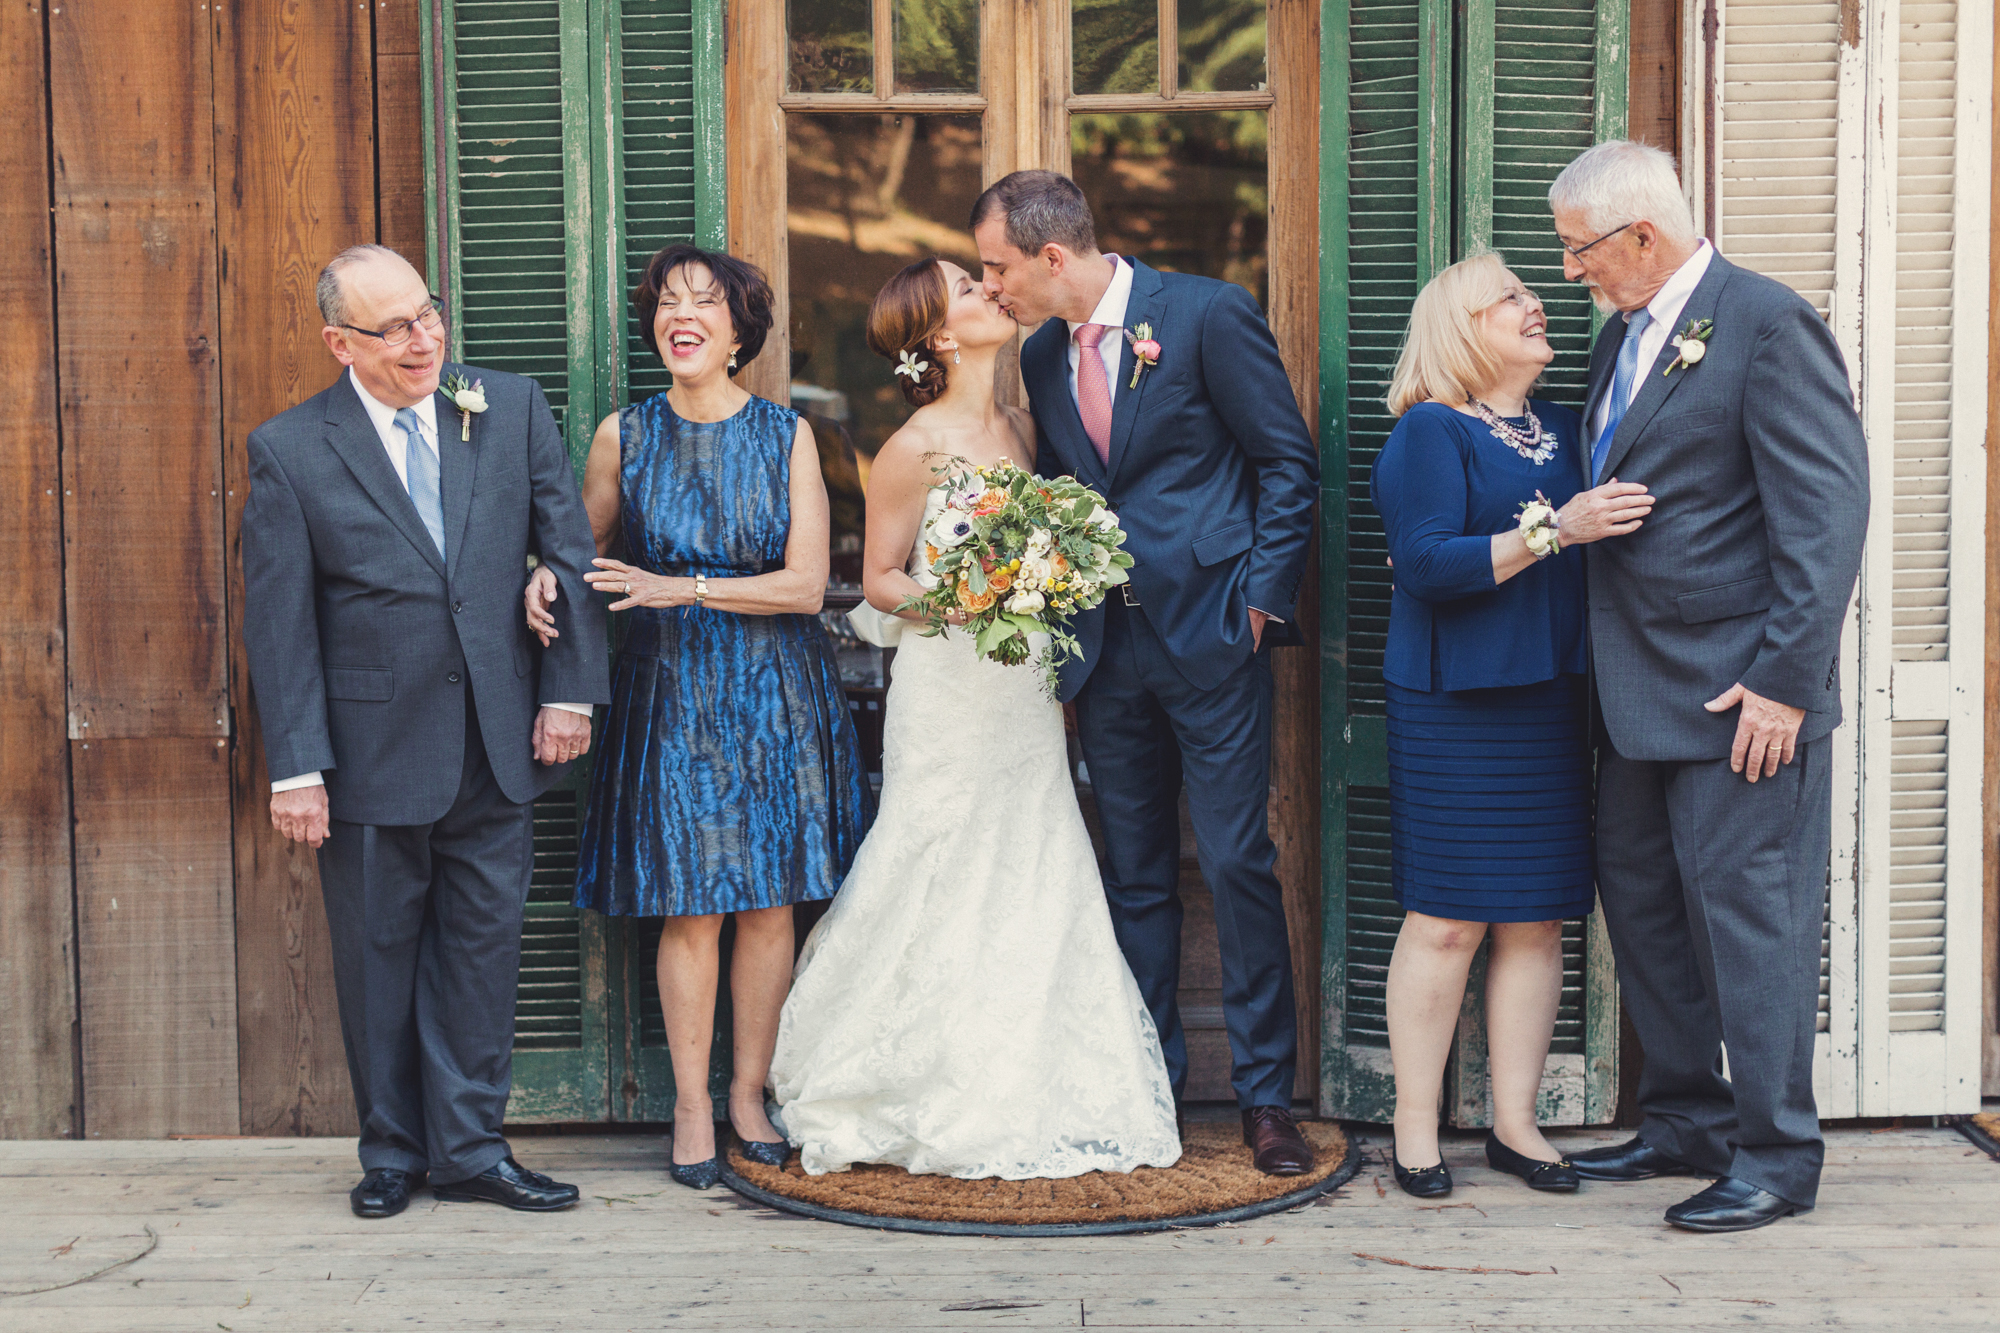 Triple S Ranch Wedding in Napa Valley @Anne-Claire Brun 0047